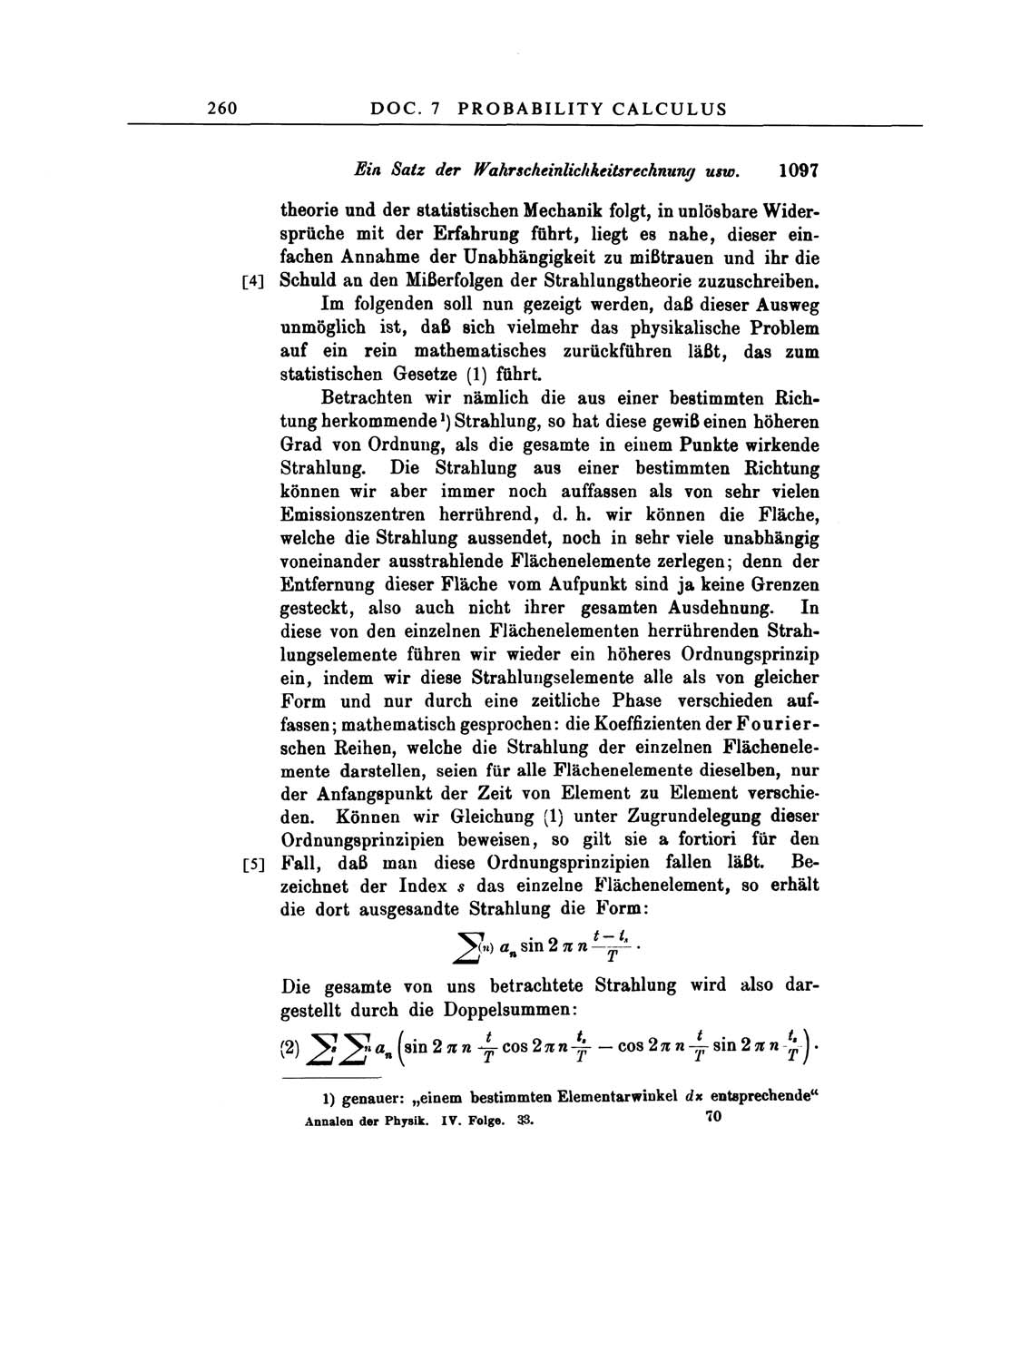 Volume 3: The Swiss Years: Writings 1909-1911 page 260